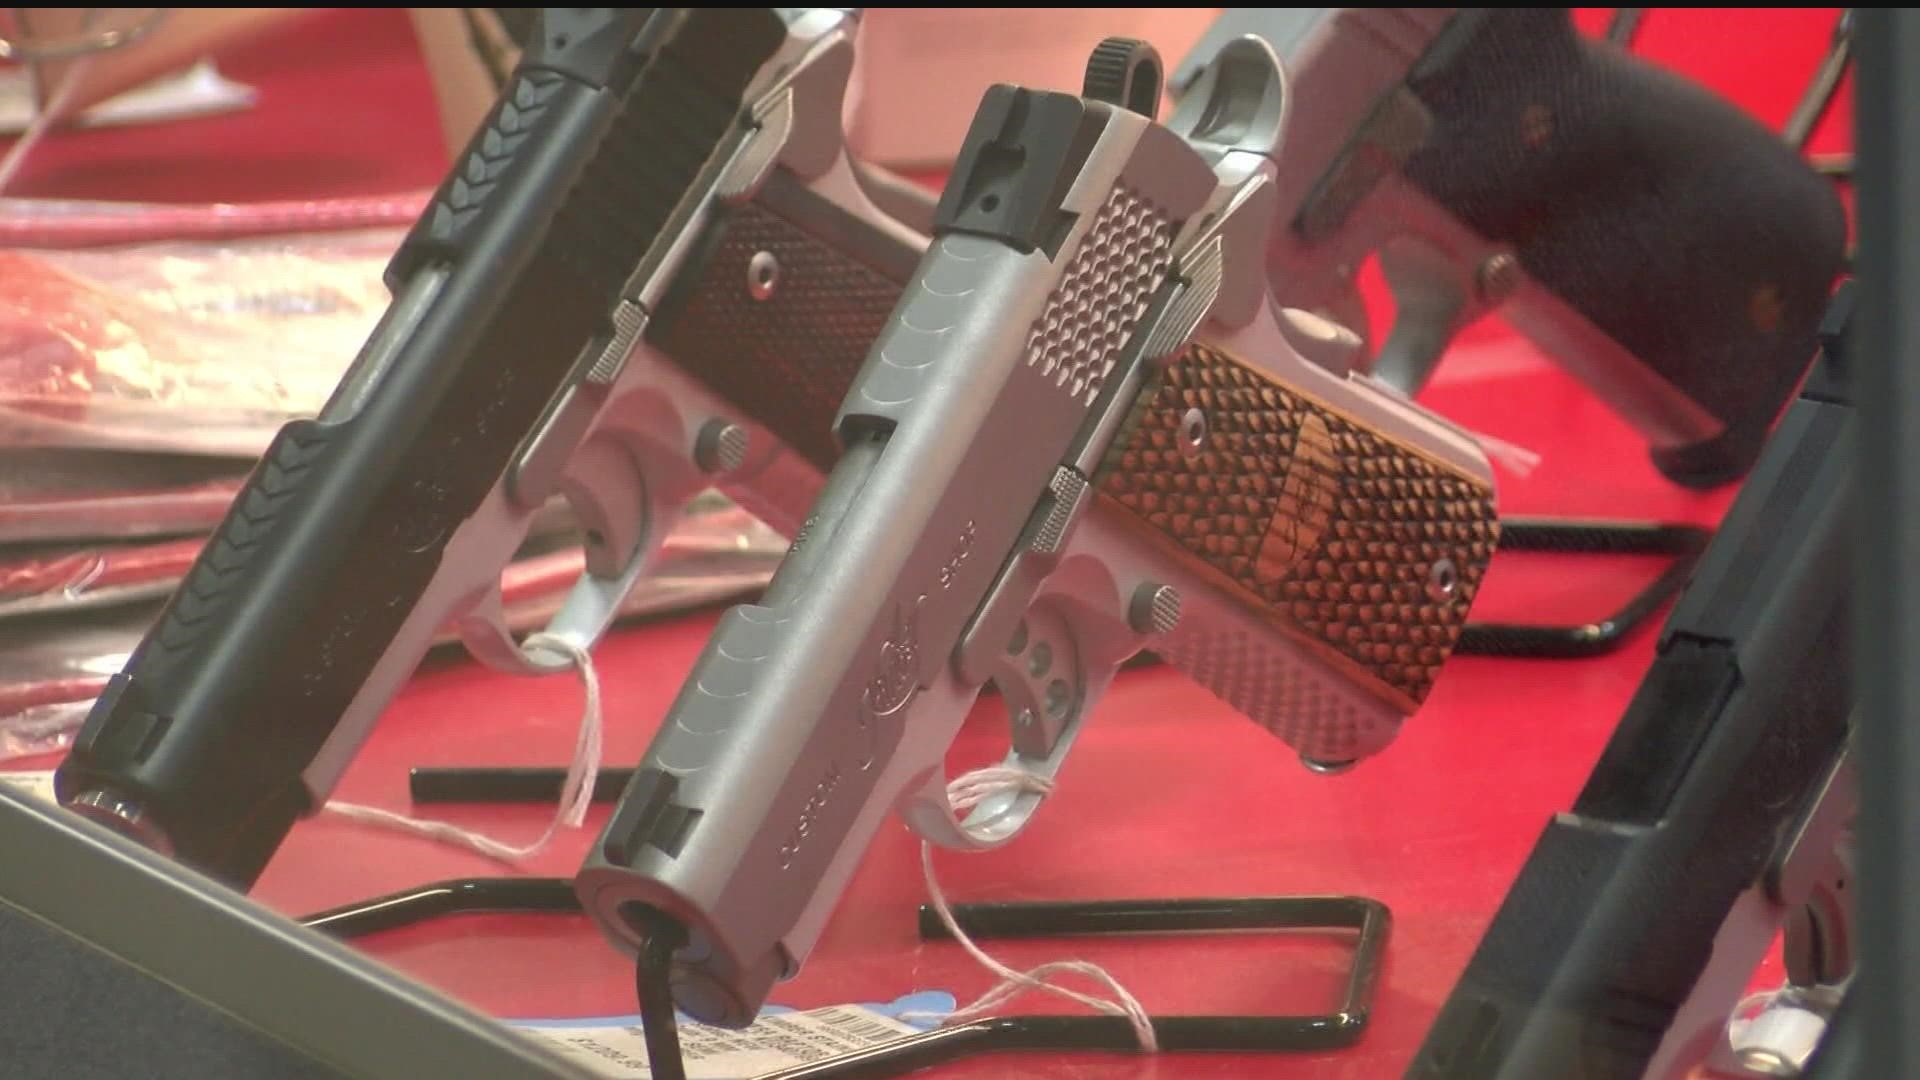 From toddlers getting ahold of guns to the mass shootings, Ramsey County leaders are addressing the violence.